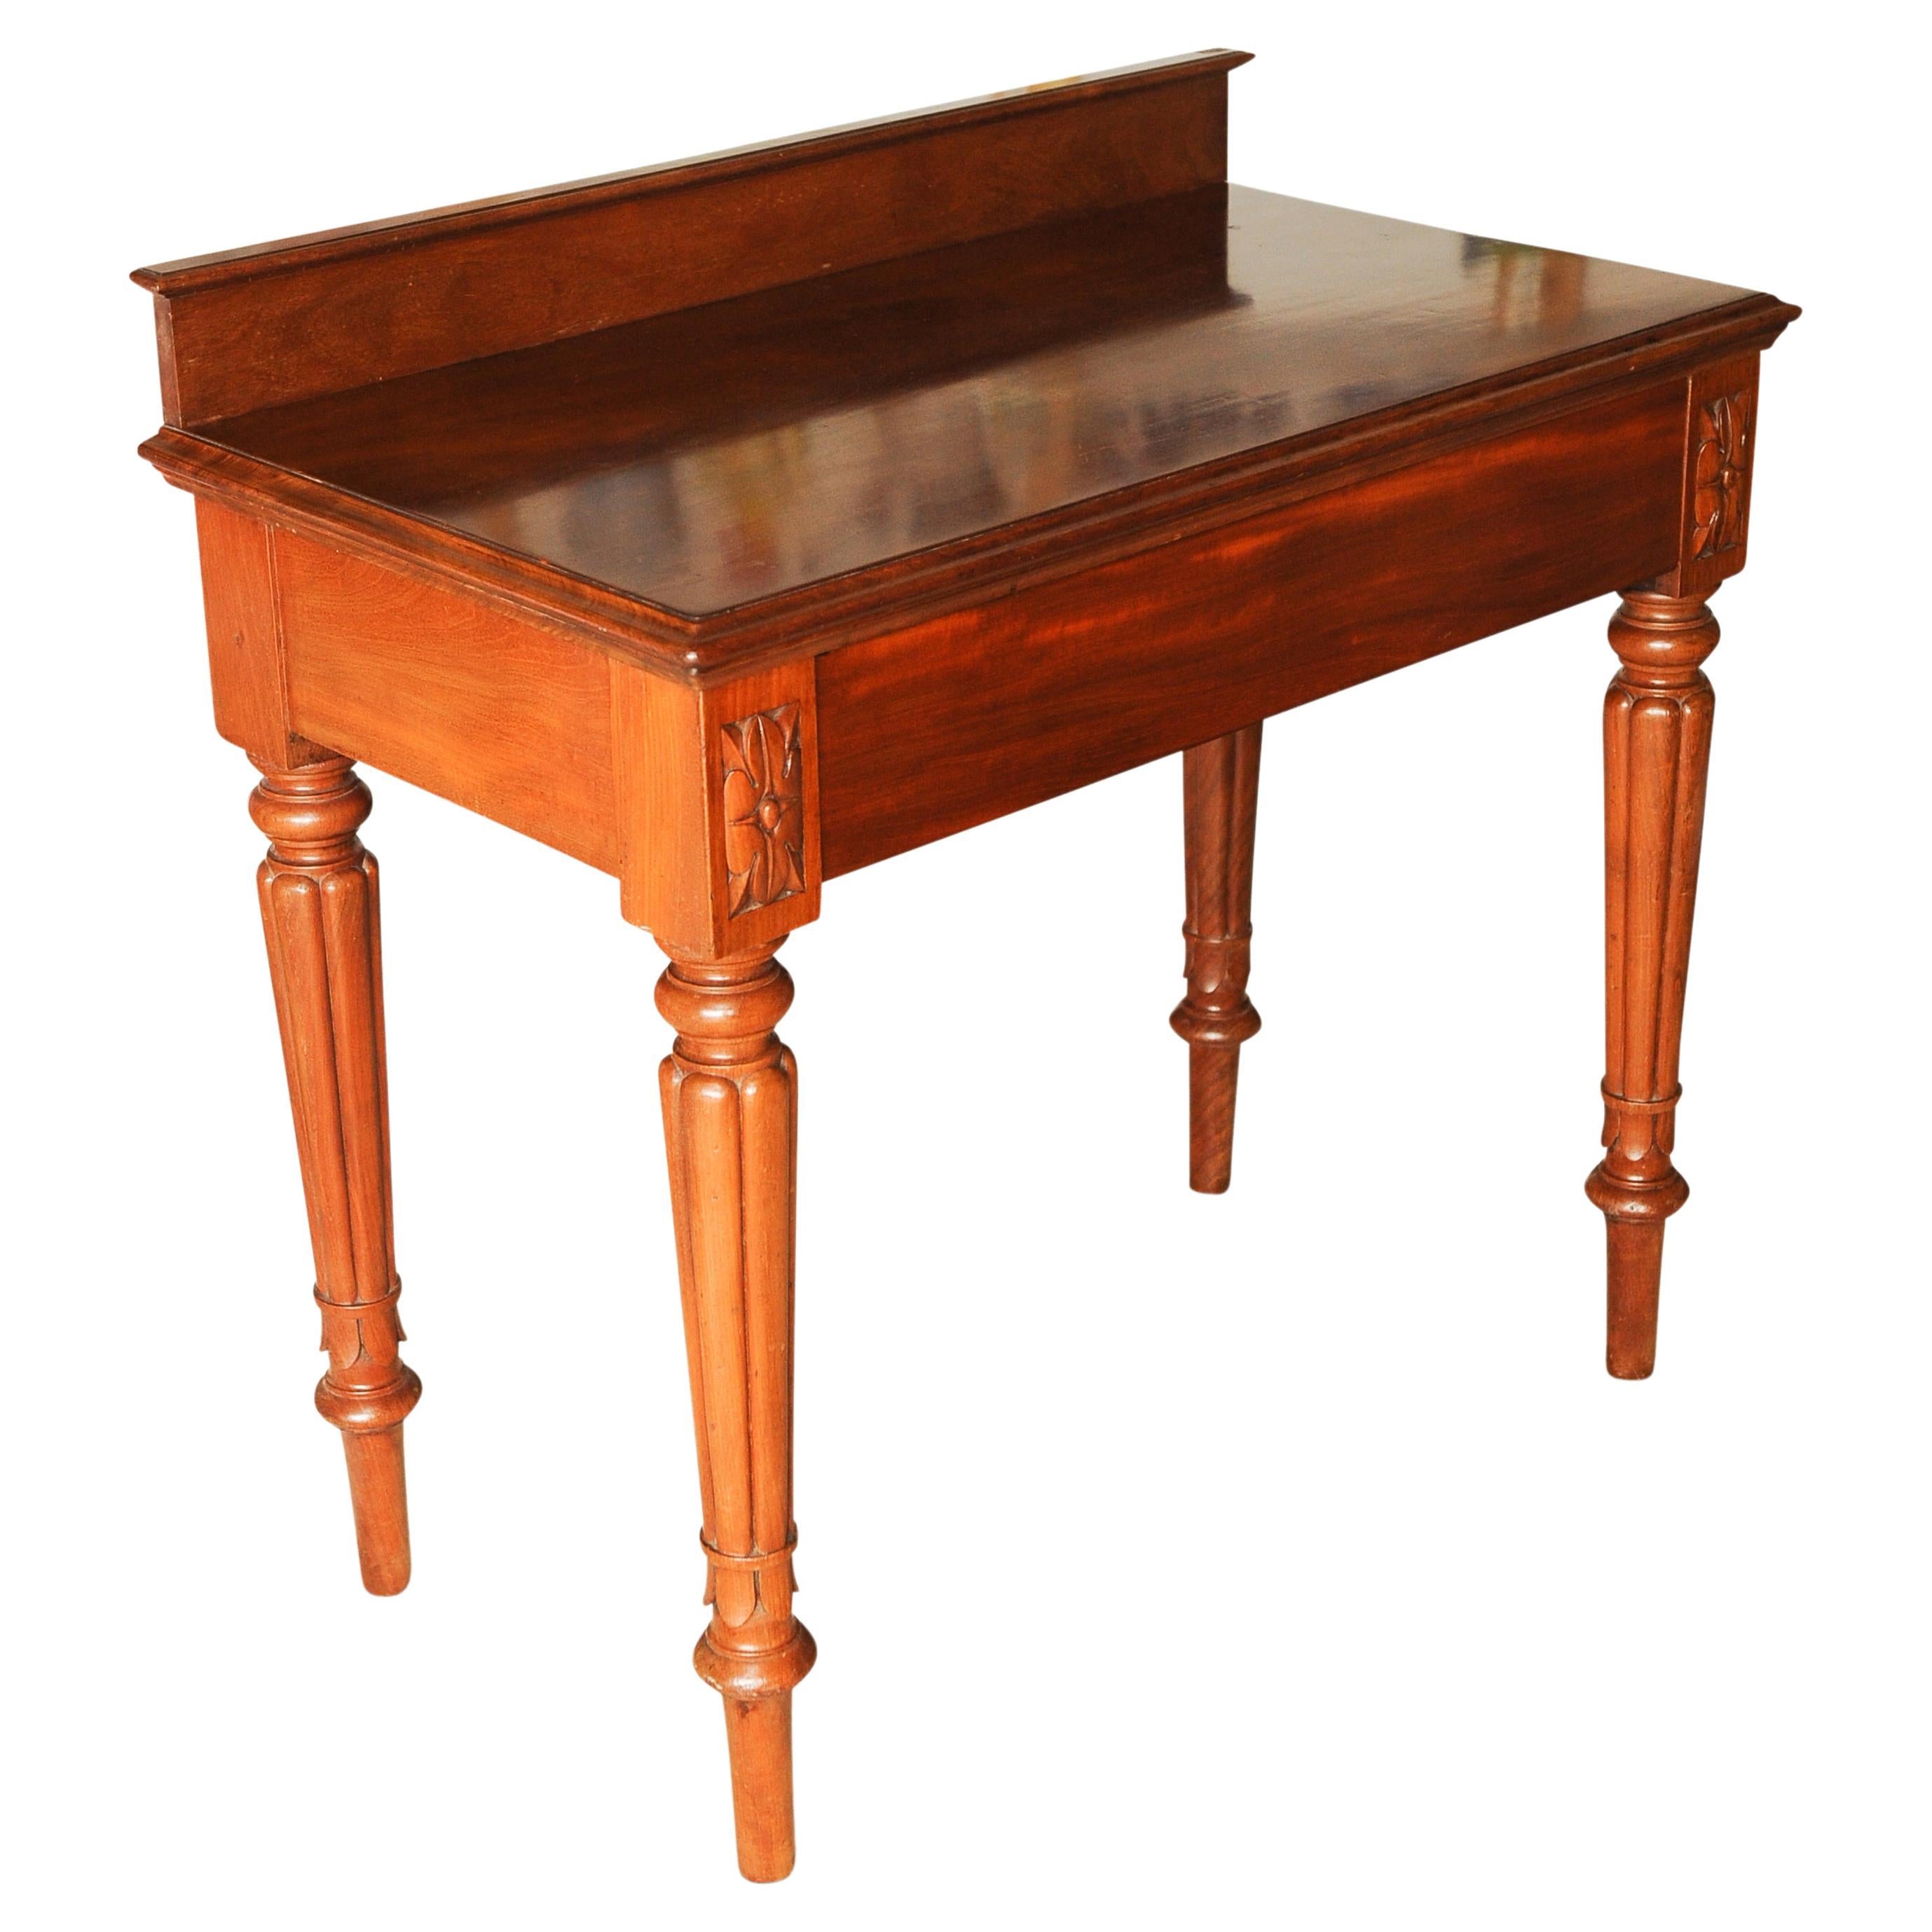 Victorian Single Drawer Chamber Side Table by Renowned London Furniture Makers Johnstone and Jeanes of New Bond Street, London W1

Makers mark stamped inside

The cabinet makers Johnstone and Jeanes produced very high quality antique furniture, as